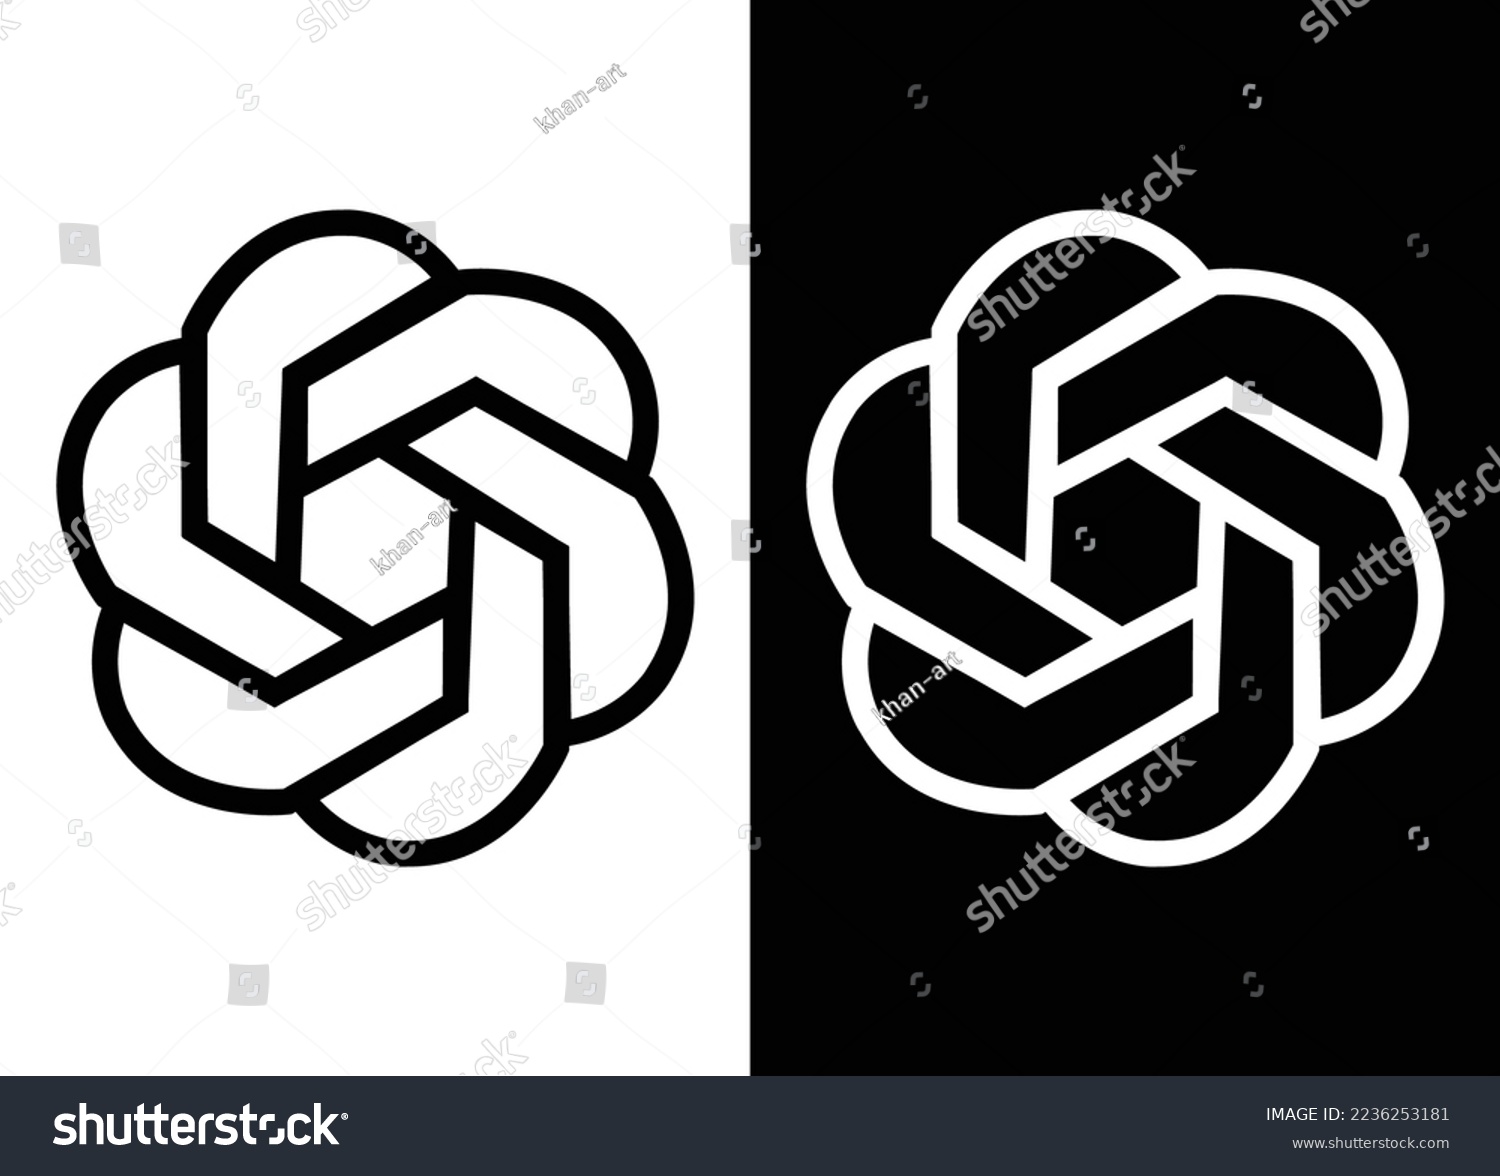 ChatGPT black logo and white logo on black background  vector in eps 8 format. chat gpt is open ai articfical chat bot system. and sora logo a video editing plate form by open ai. #2236253181